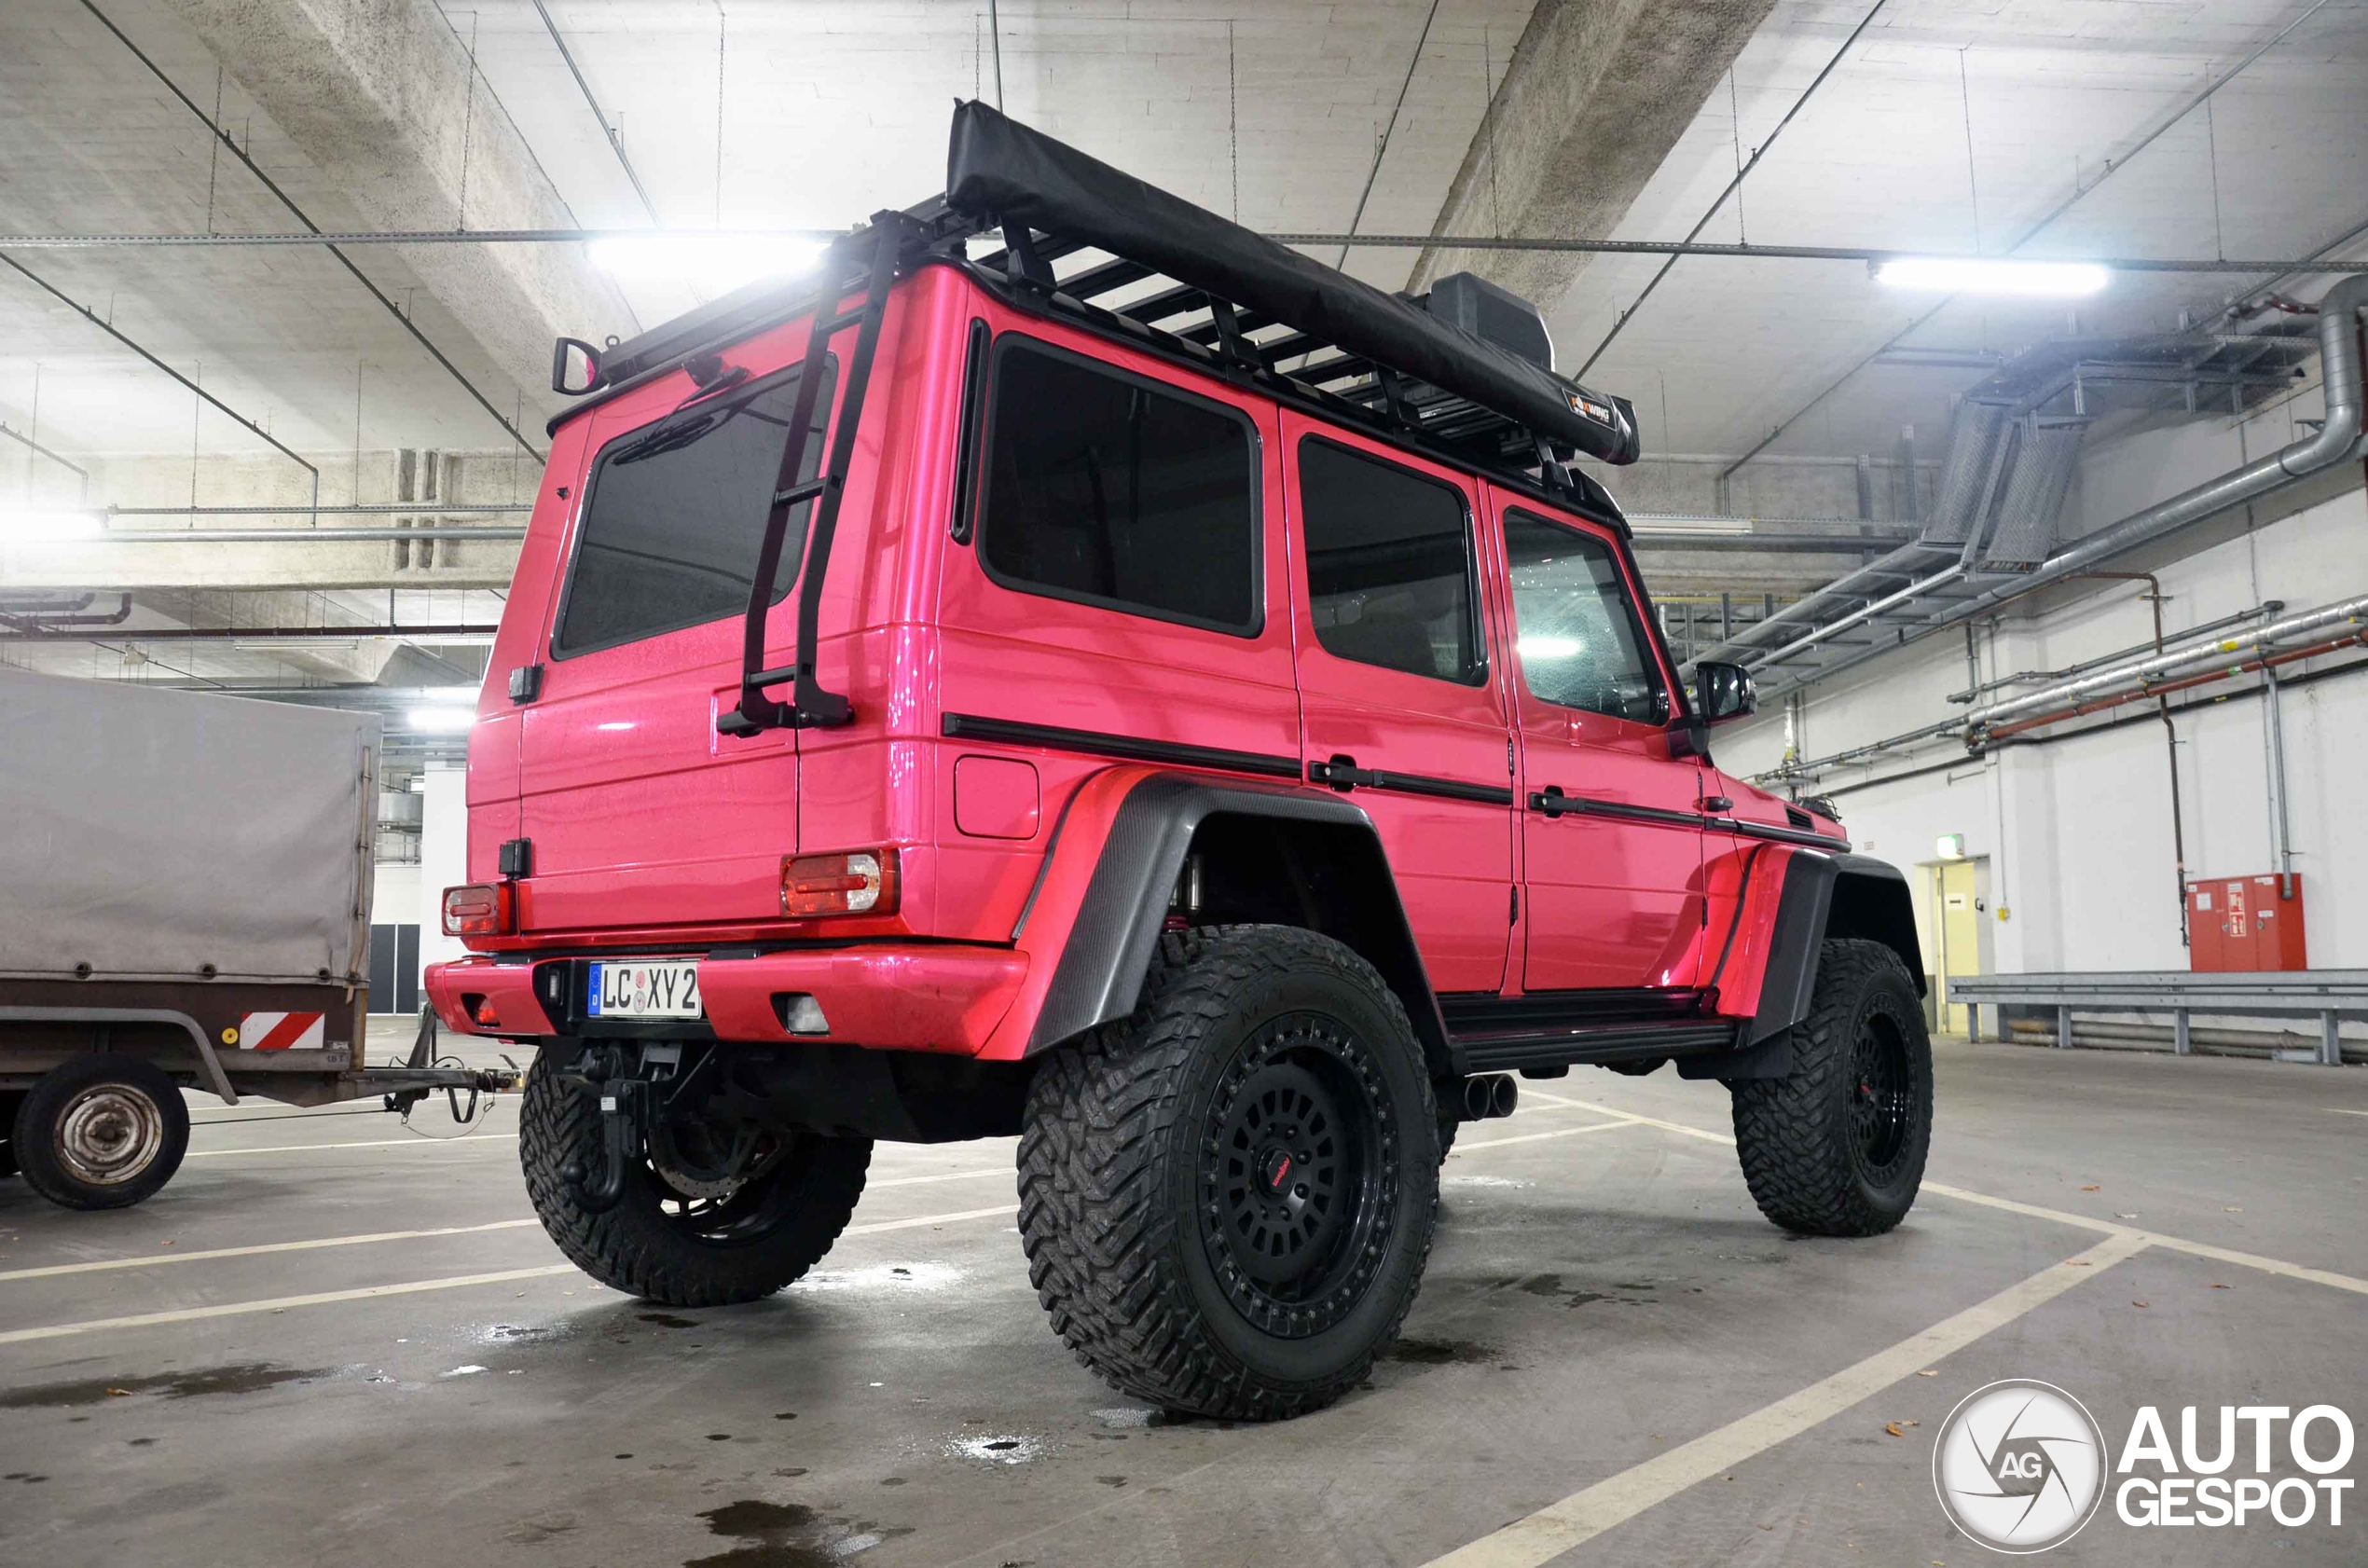 Only a pink 6x6 would be more conspicuous.